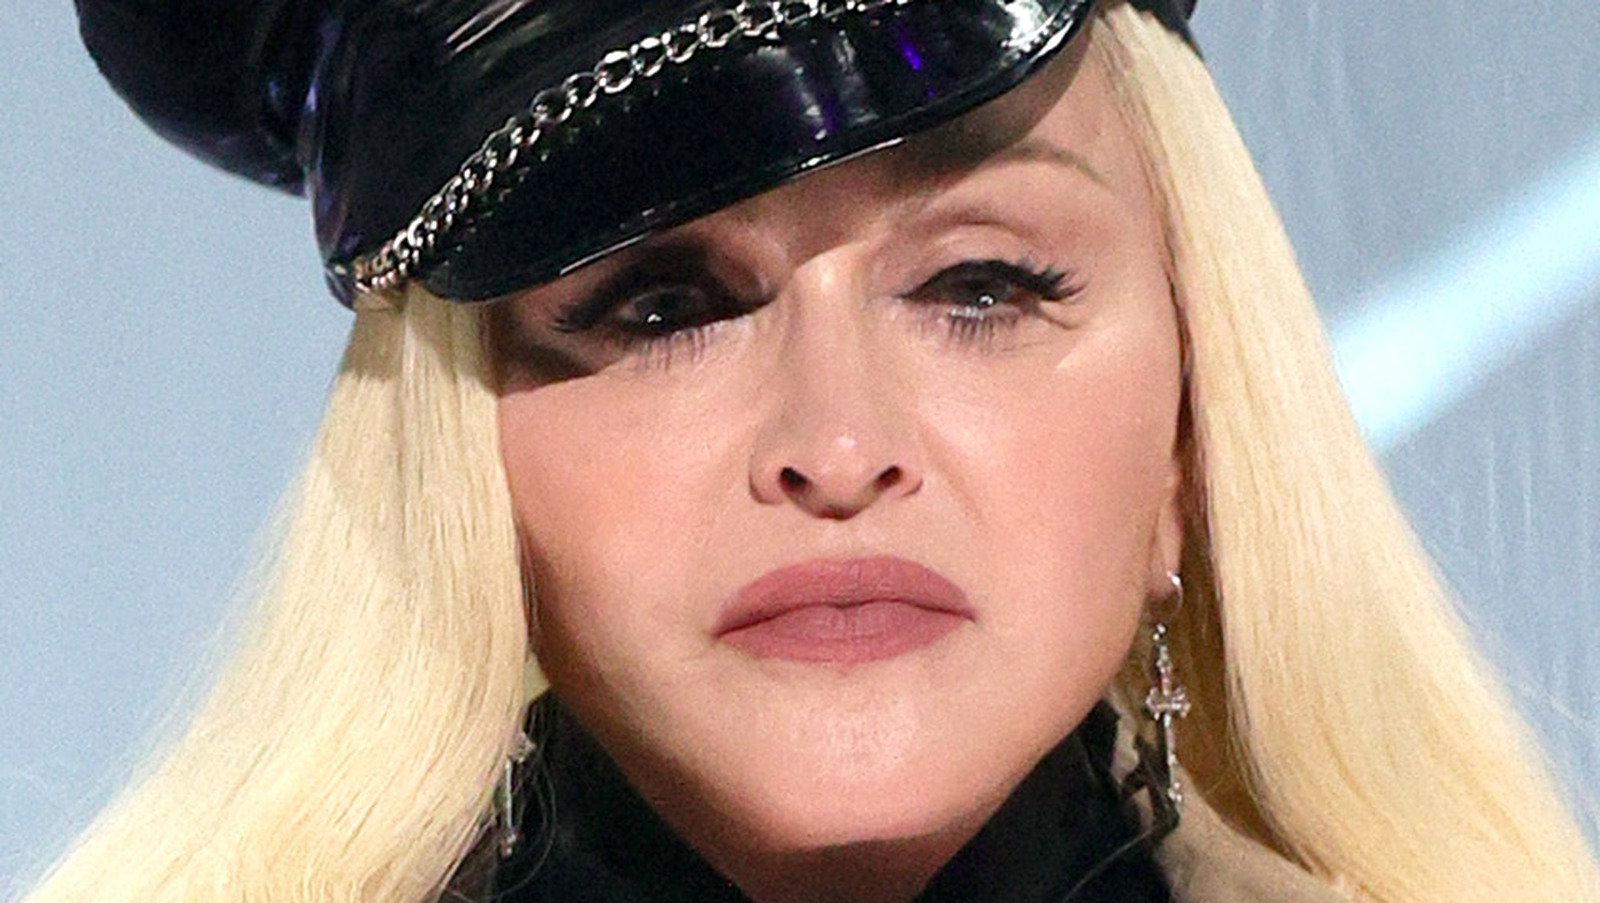 The Source |Pop Singer Madonna Rushed To The Hospital After A ‘Bacterial Infection’